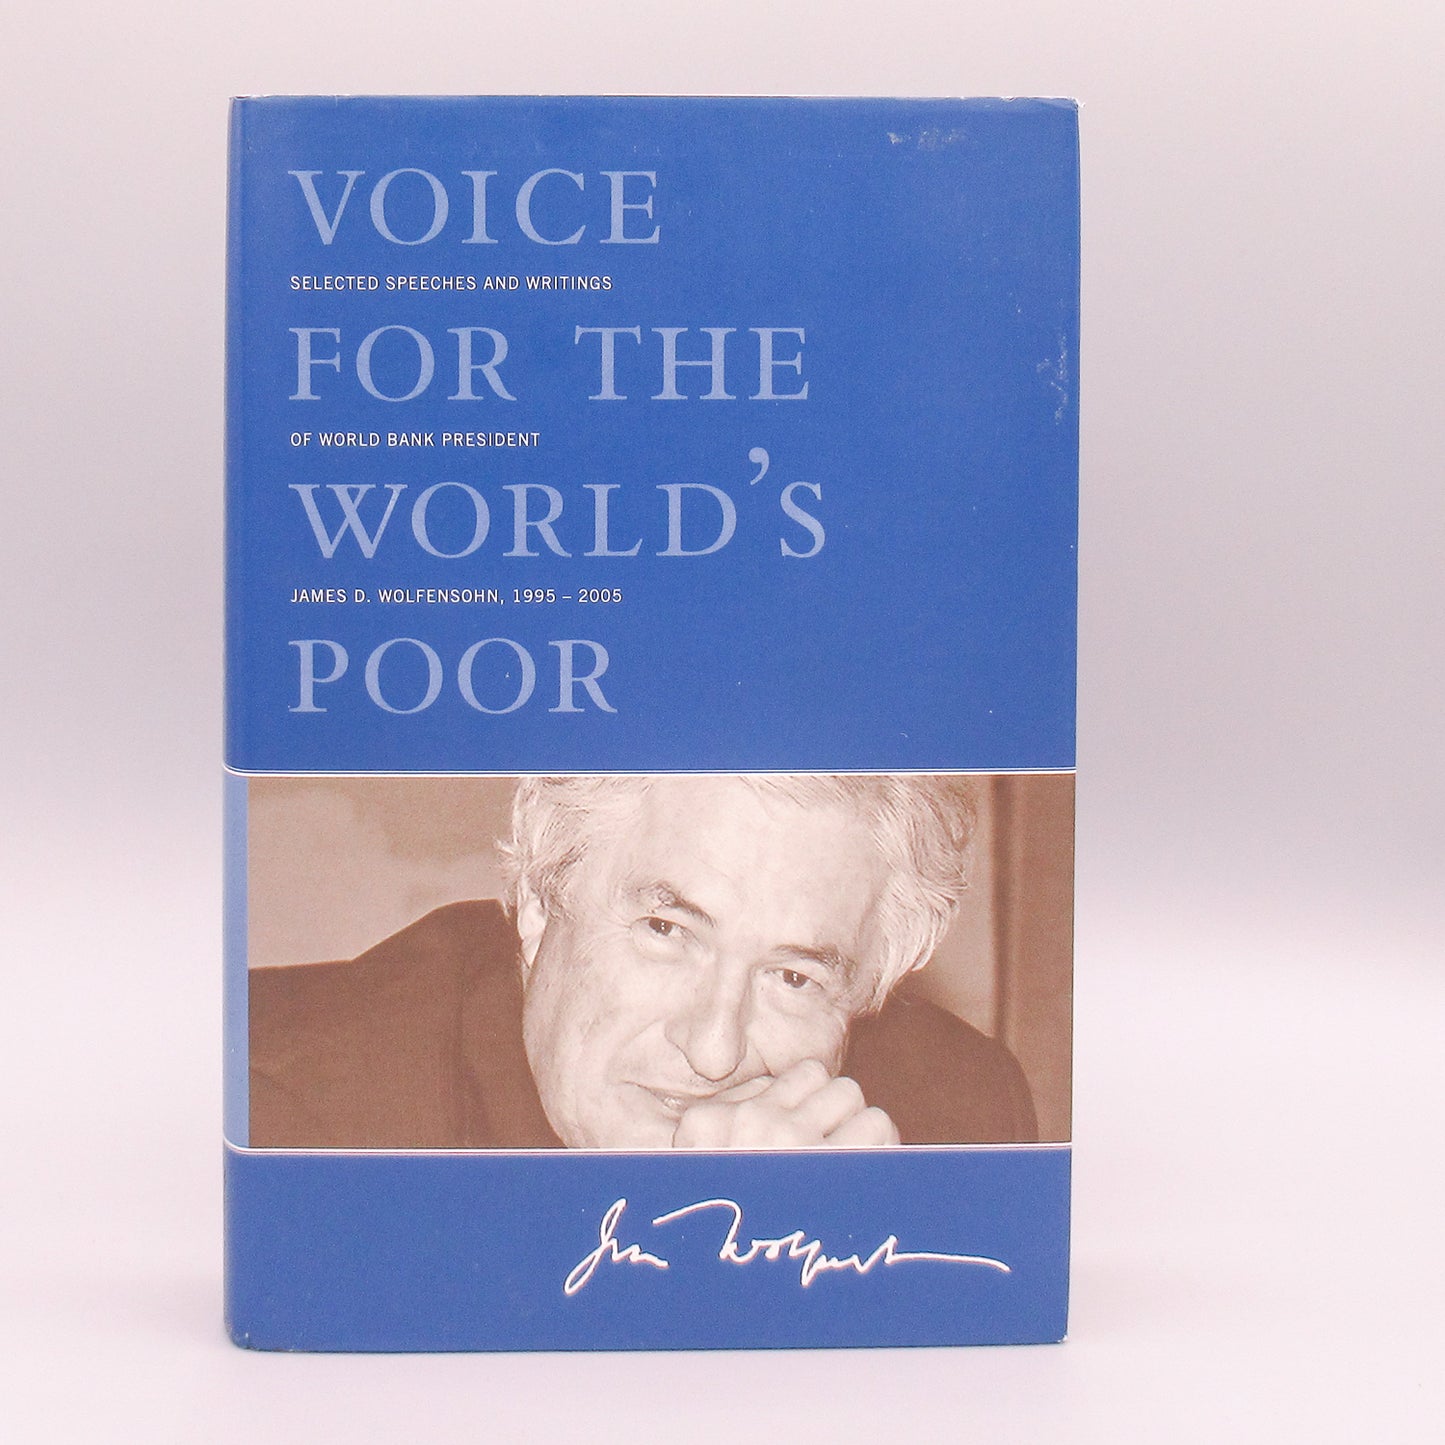 Voice for the World's Poor: Selected Speeches and Writings of World Bank President James D. Wolfensohn, 1995-2005 ***